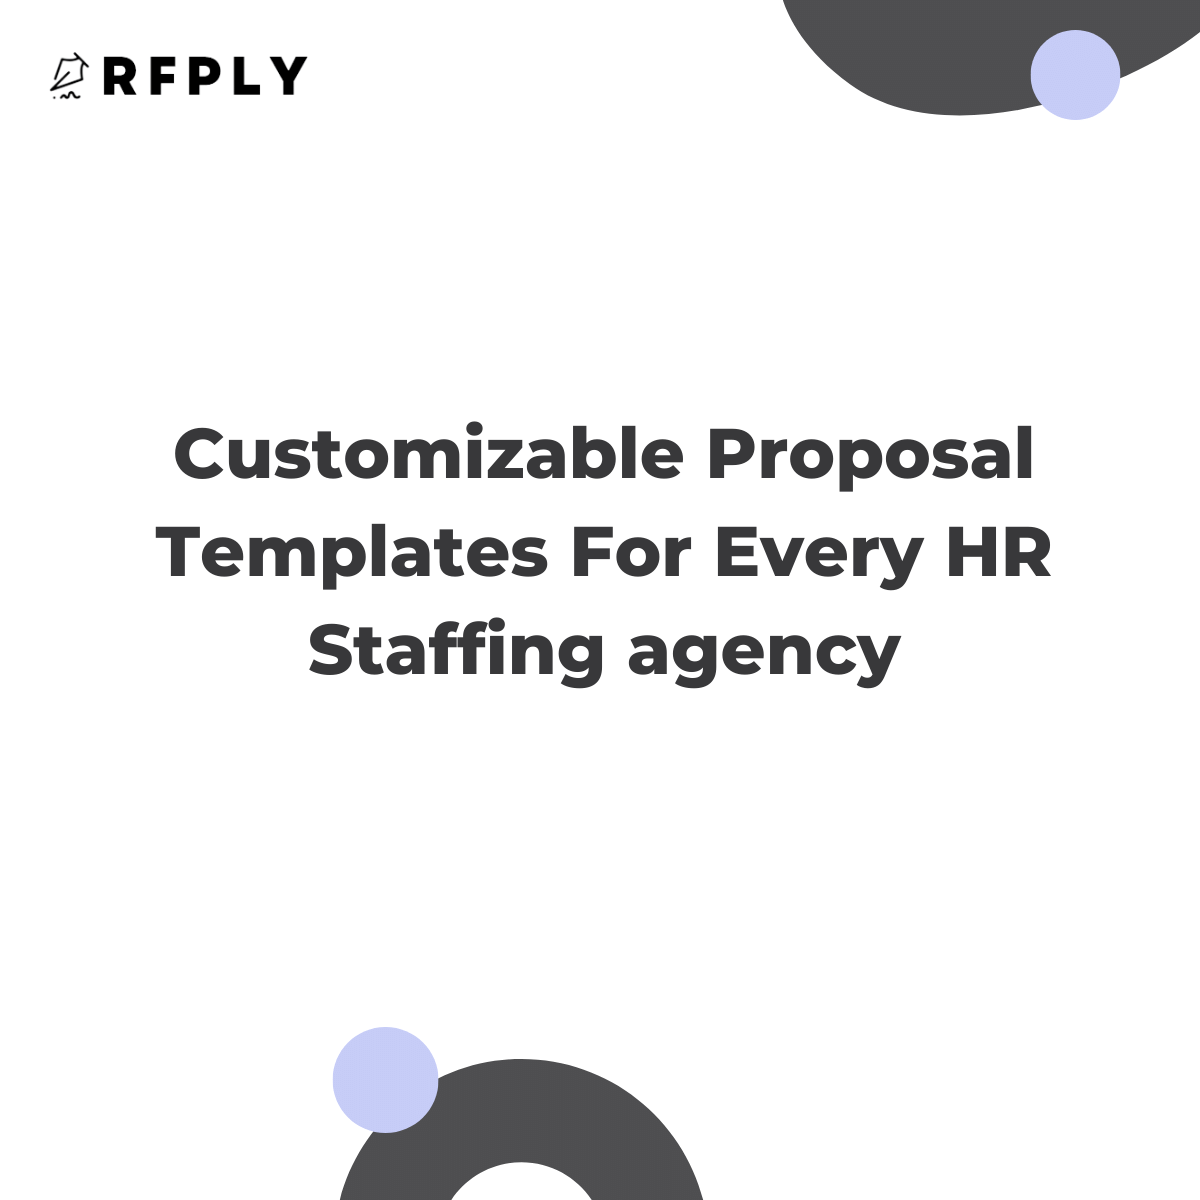 Customizable Proposal Templates For Every HR Staffing agency